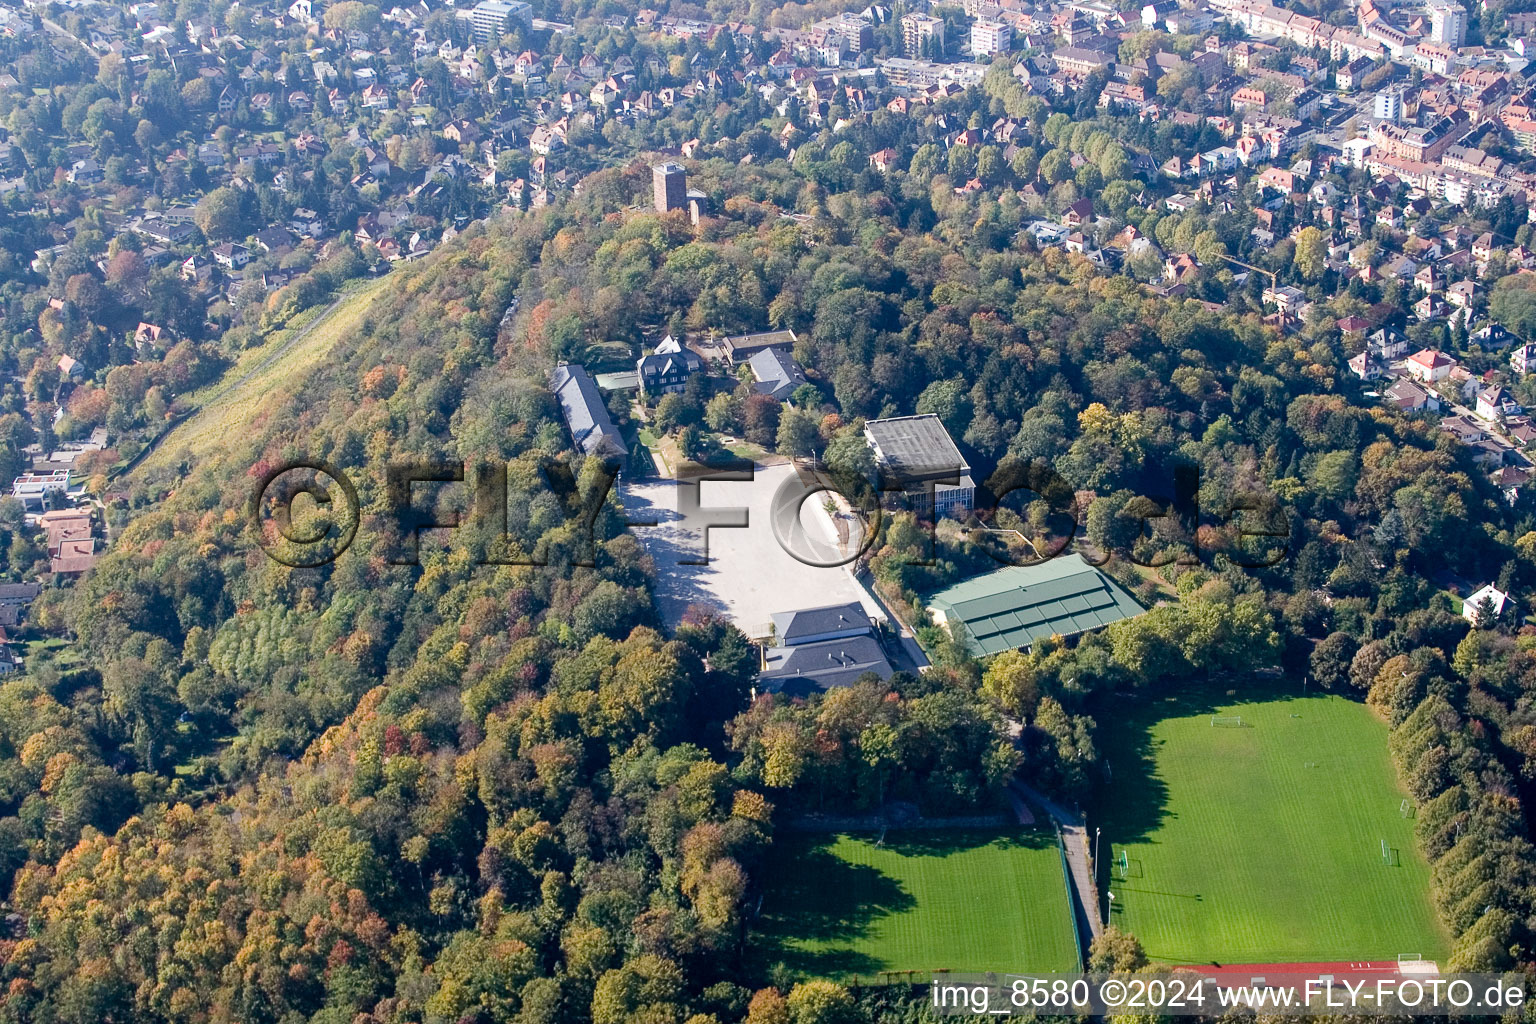 Aerial view of Sports grounds and football pitch of Sportschule Schoeneck - national soccer training center on the Turmberg in the district Durlach in Karlsruhe in the state Baden-Wurttemberg